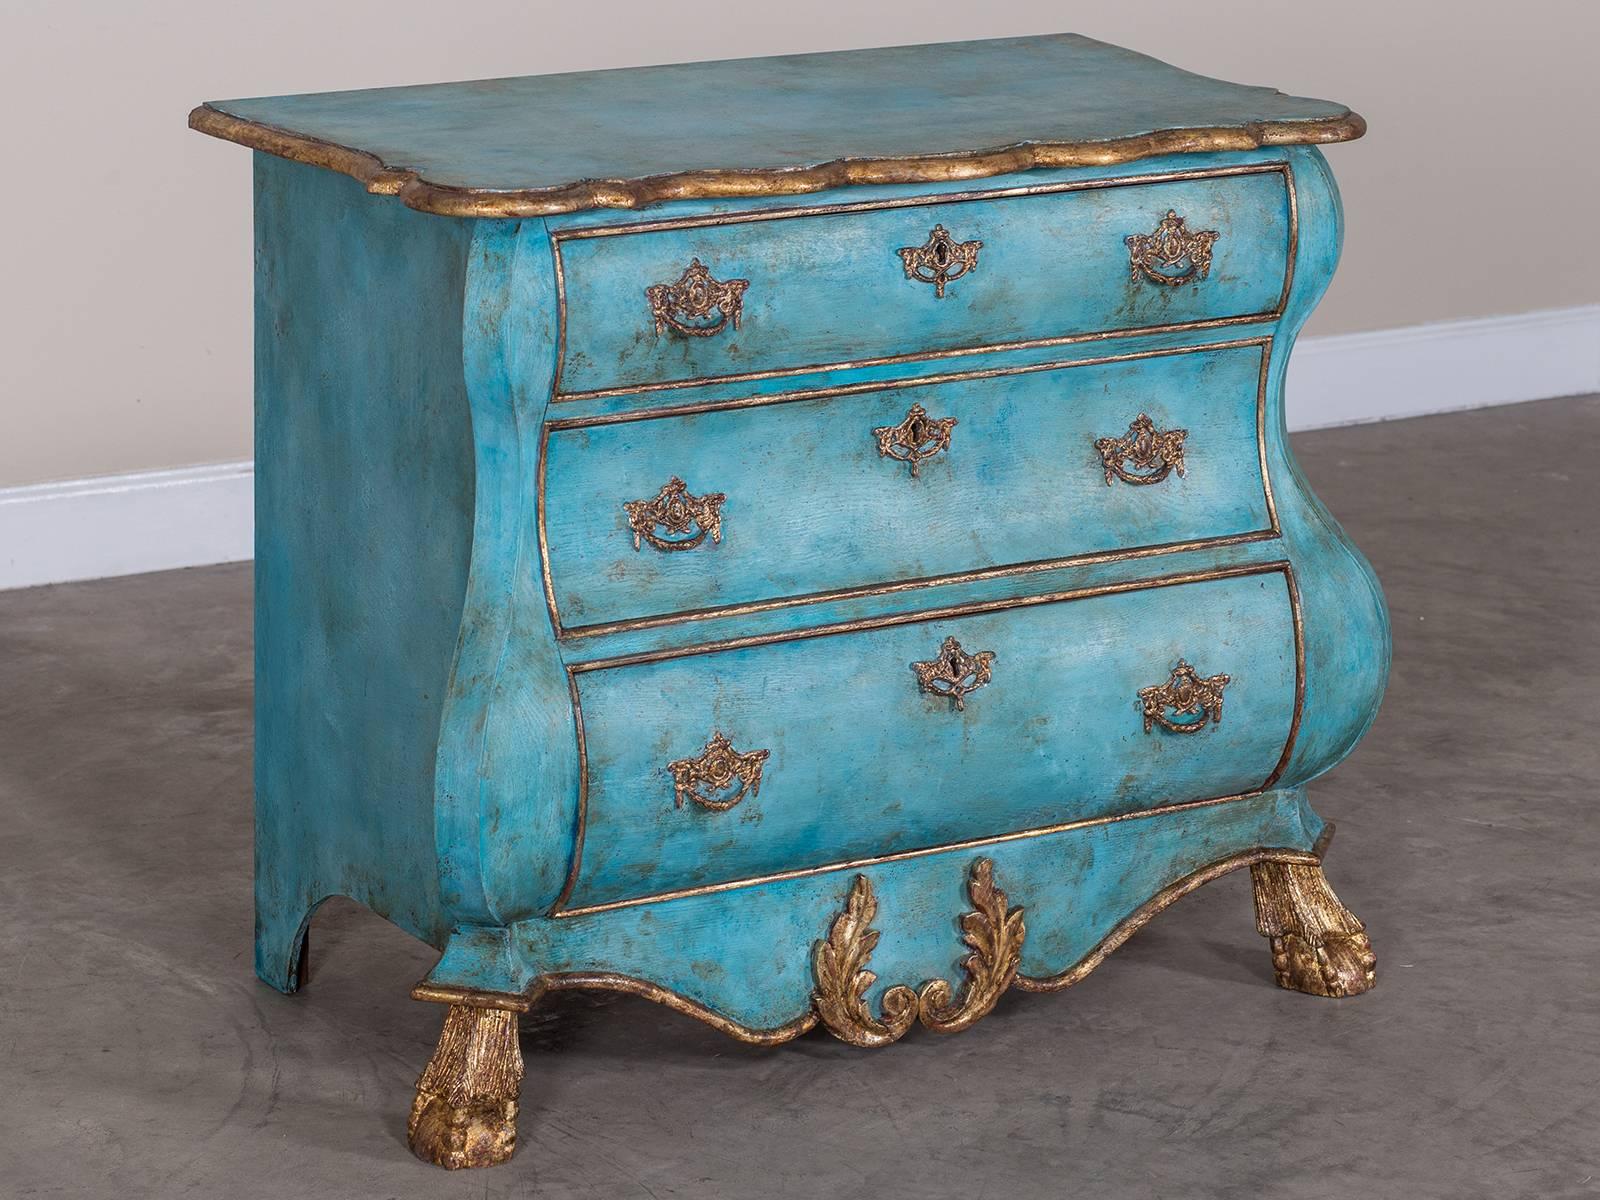 Be the first to see our new arrivals directly through 1stdibs! Please click follow dealer below.

A beautifully sculptural antique Dutch painted and gilded bombé commode (chest of drawers) from Holland, circa 1850. Please notice the elegant shaped